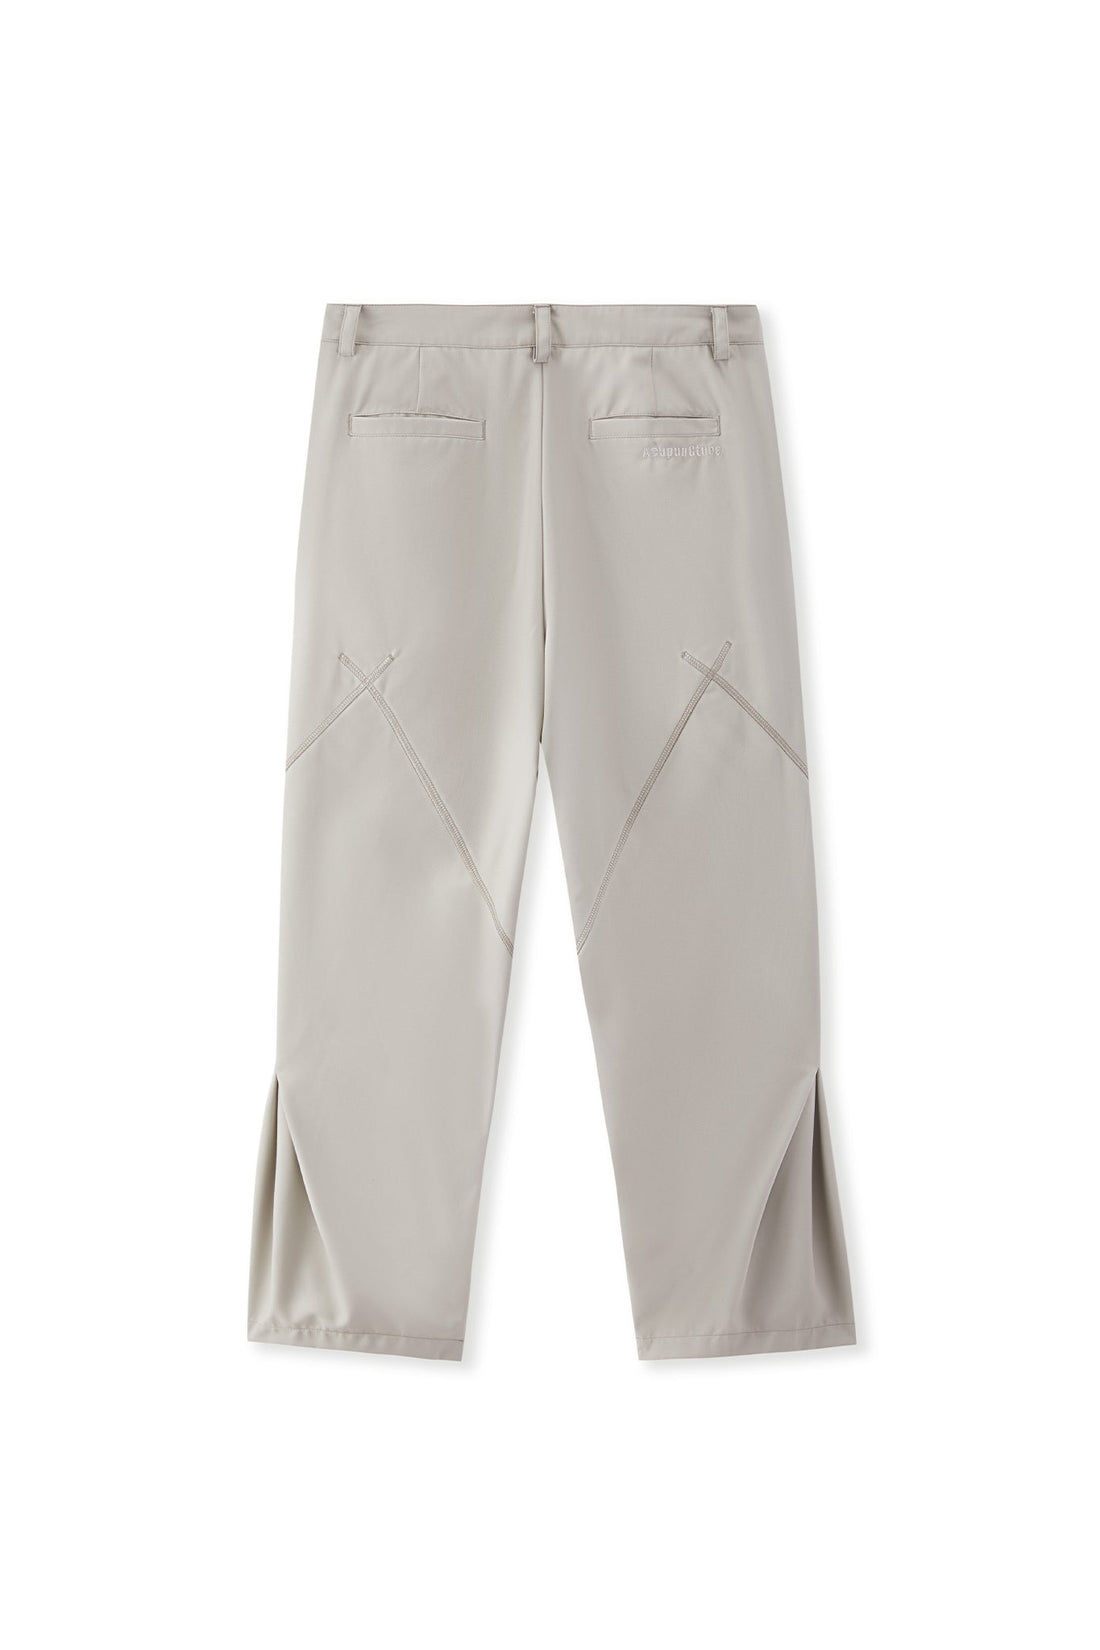 SHADES PANTS LIGHT GREY Acupuncture